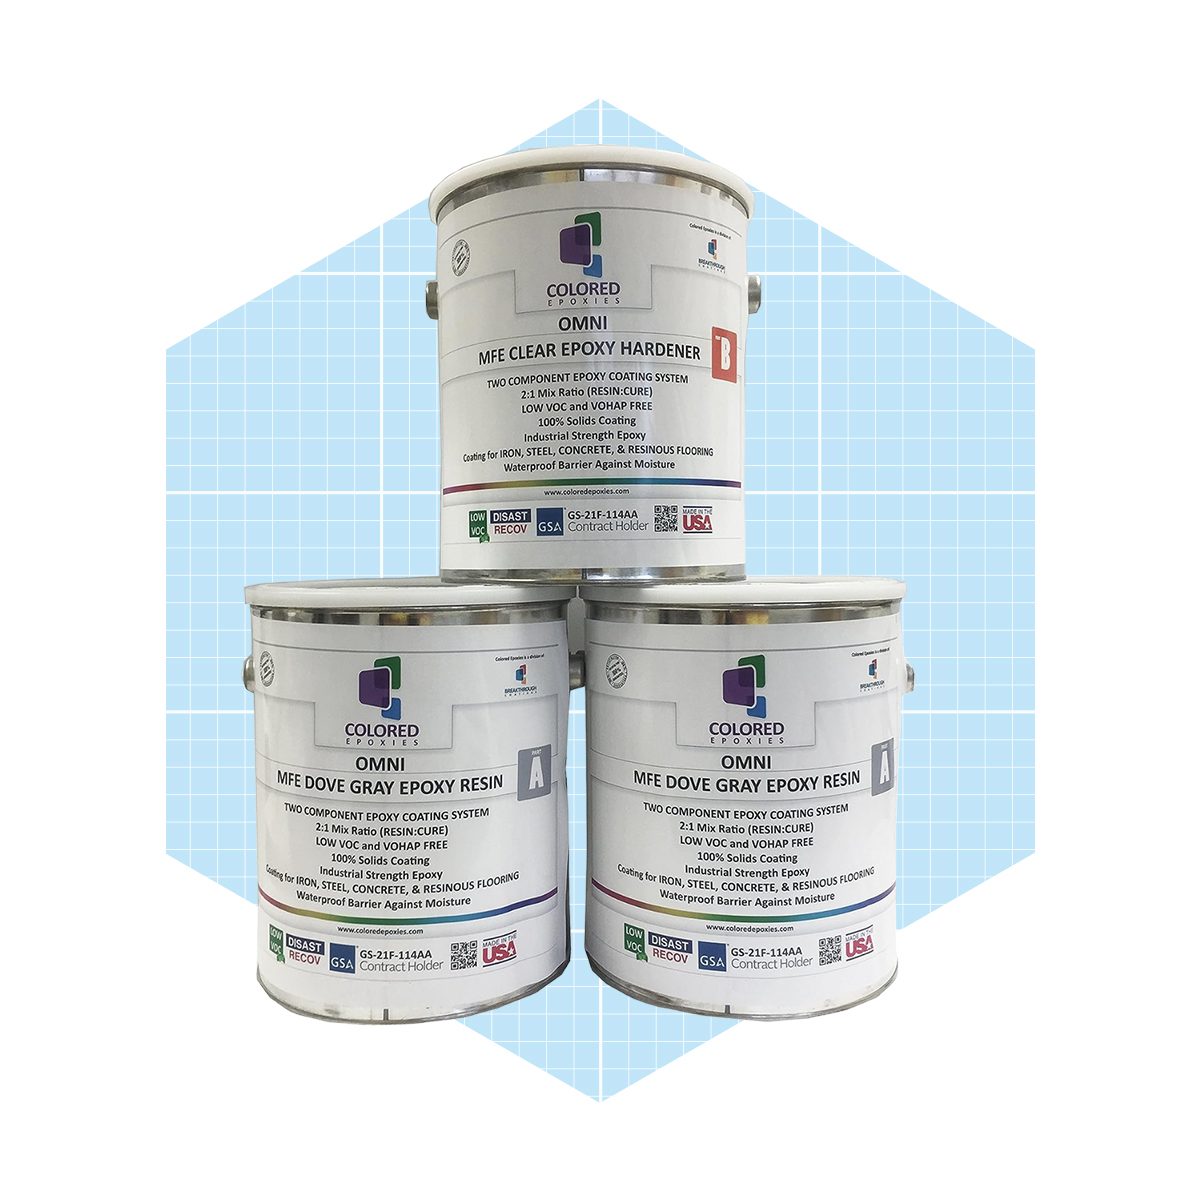 Coloredepoxies 10019 Light Gray Epoxy Resin Coating Made With and